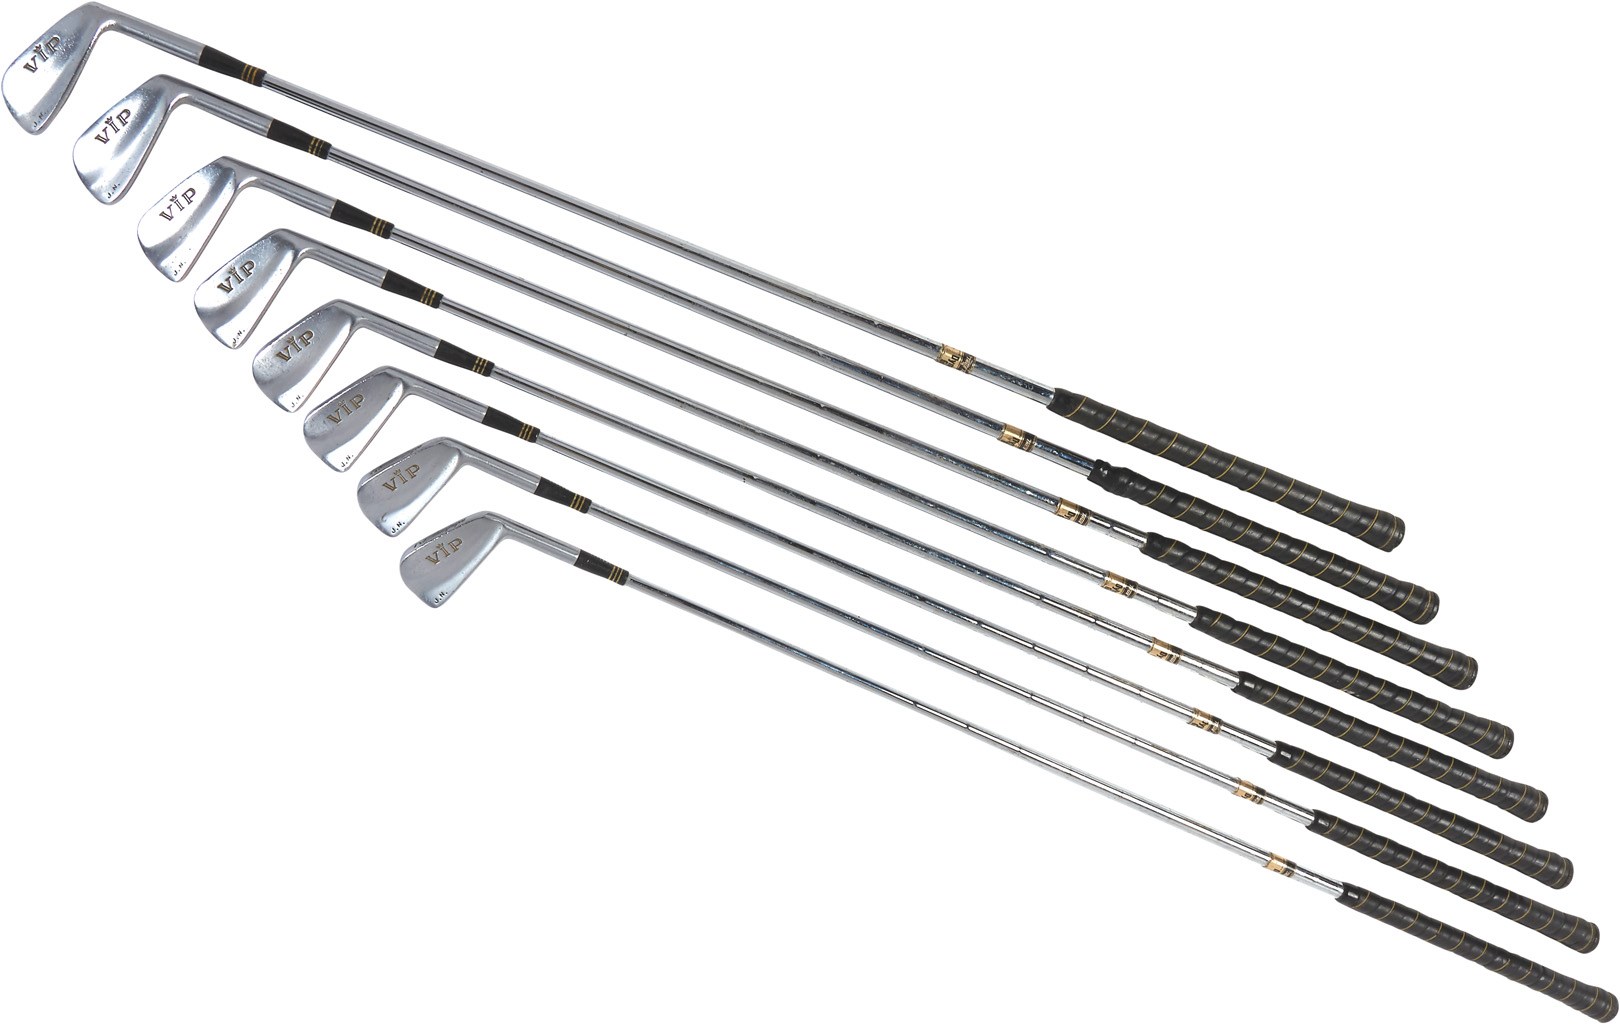 - Jack Nicklaus Tournament Used Set of 8 Irons (Nicklaus LOA)